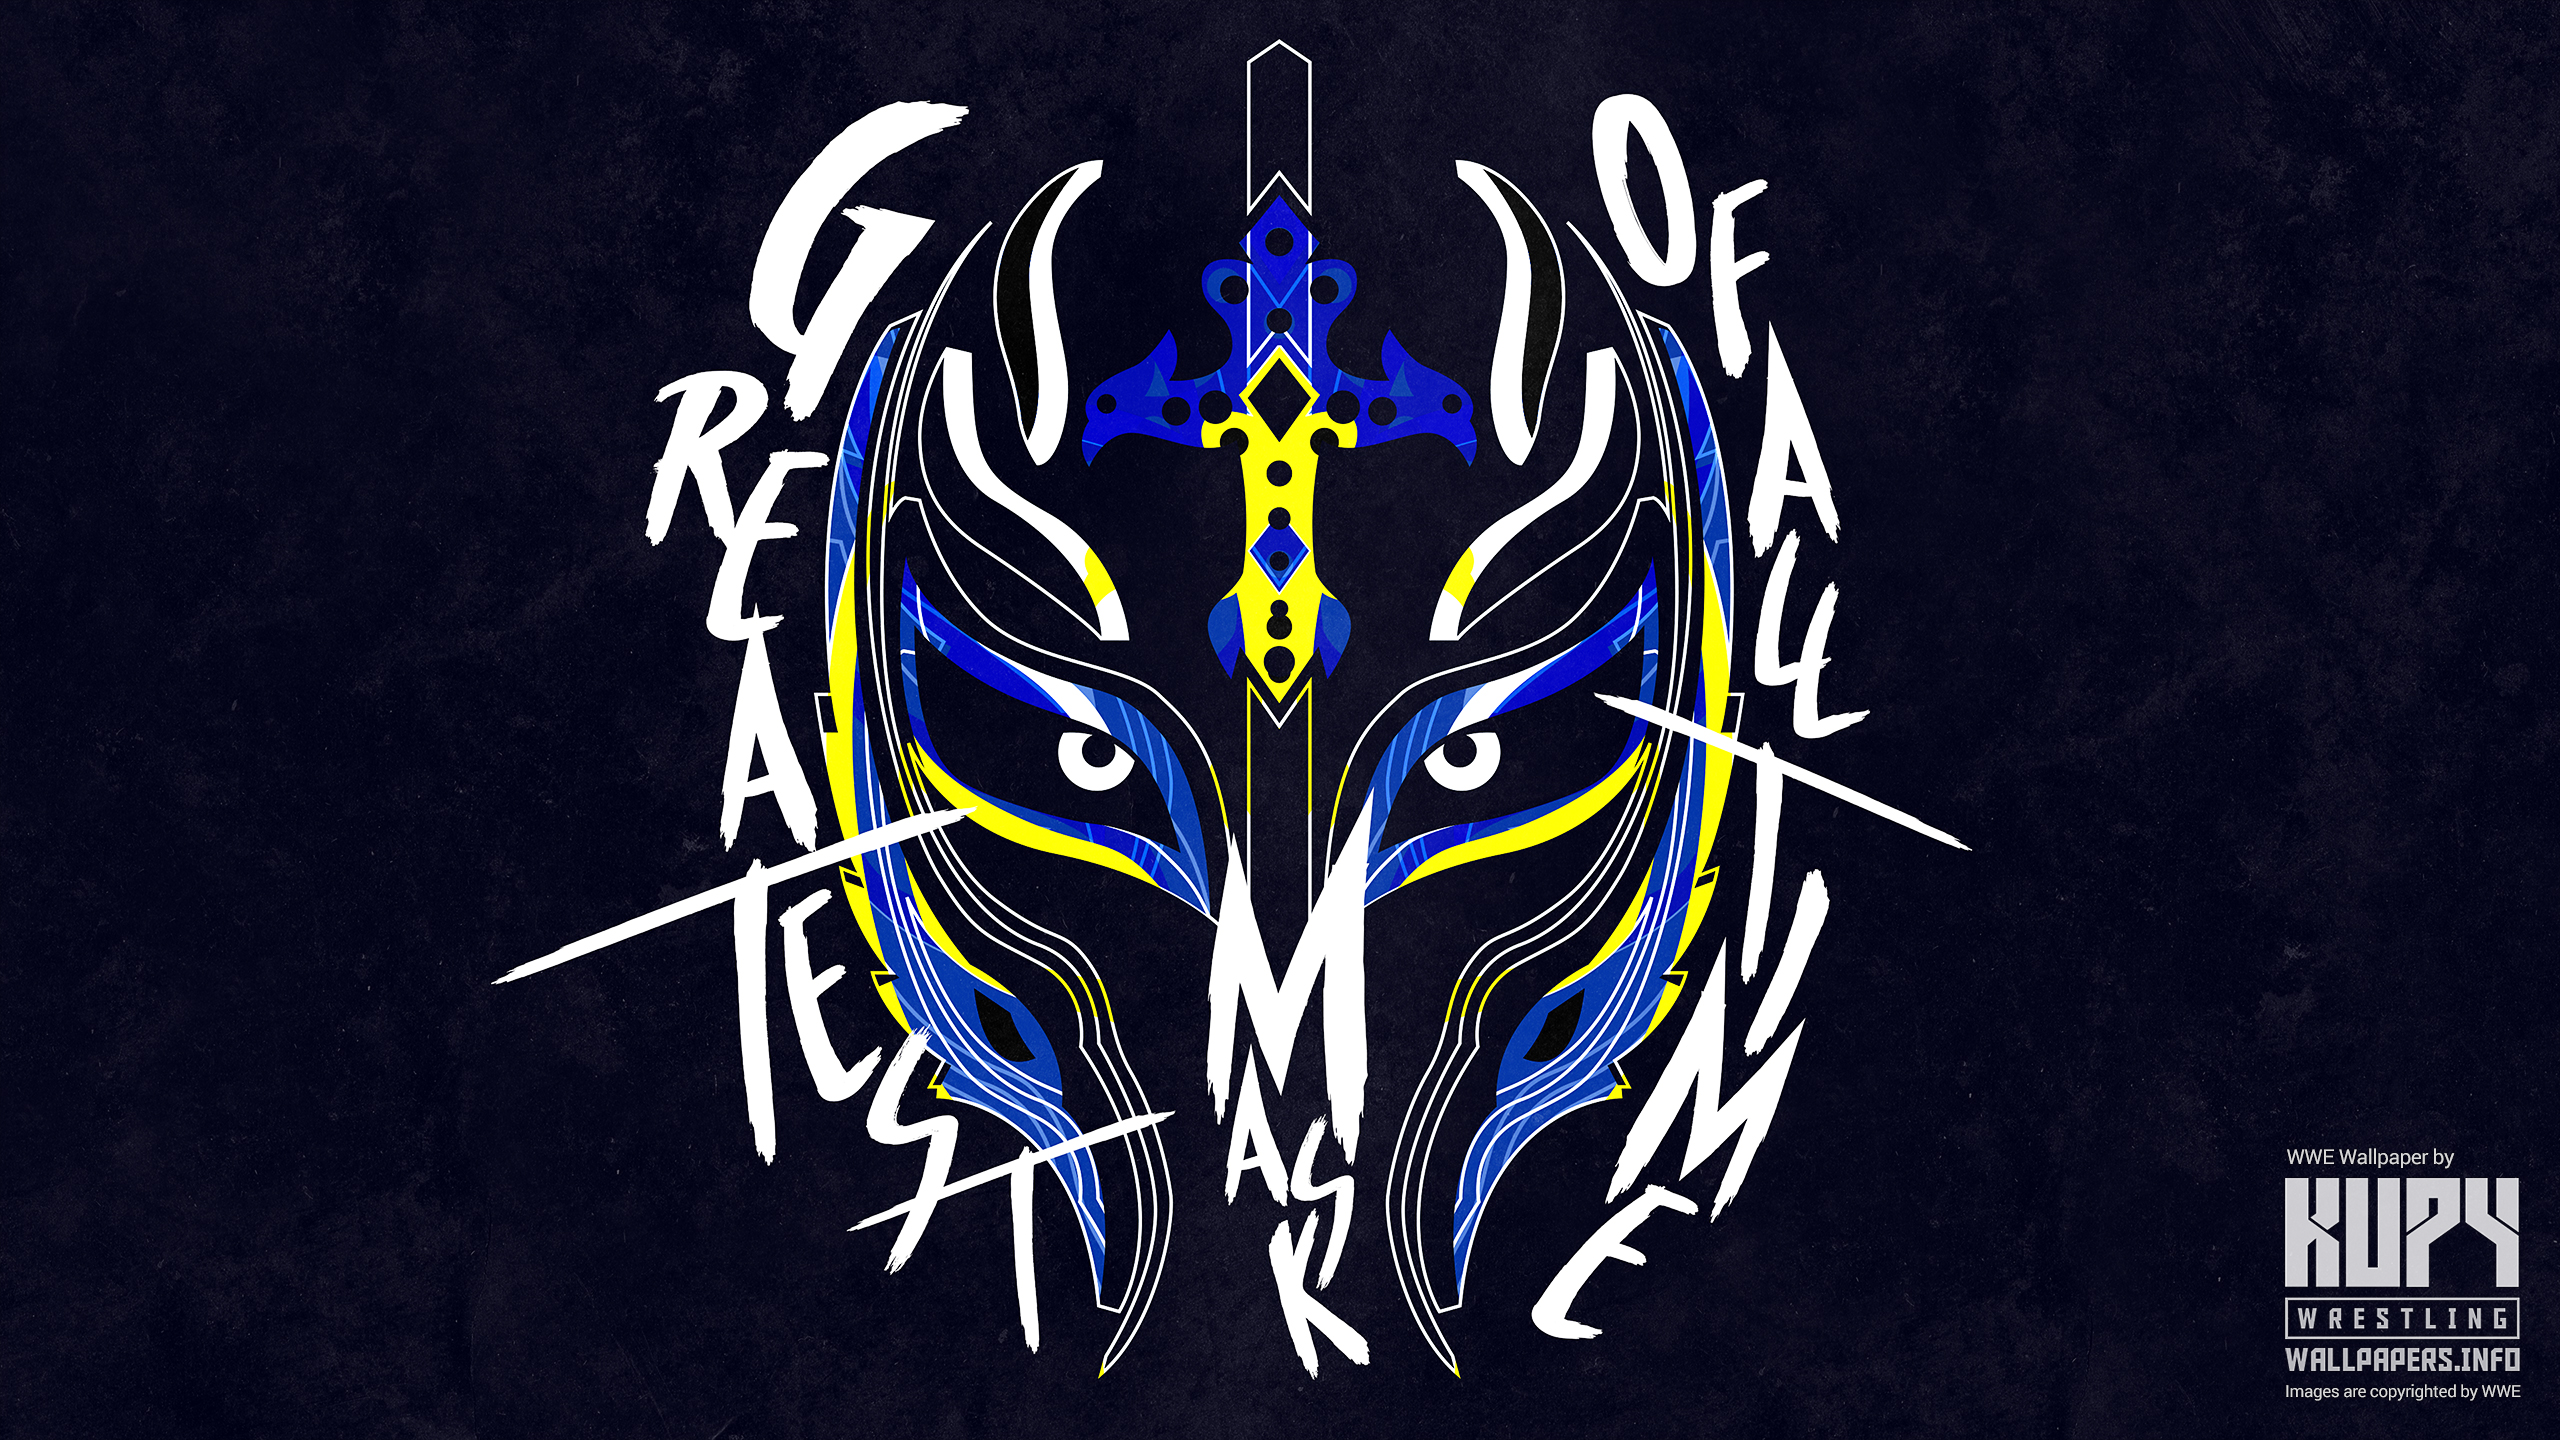 Kupy Wrestling Wallpapers The Latest Source For Your Wwe Wrestling Wallpaper Needs Mobile Hd And 4k Resolutions Available Rey Mysterio Archives Kupy Wrestling Wallpapers The Latest Source For Your